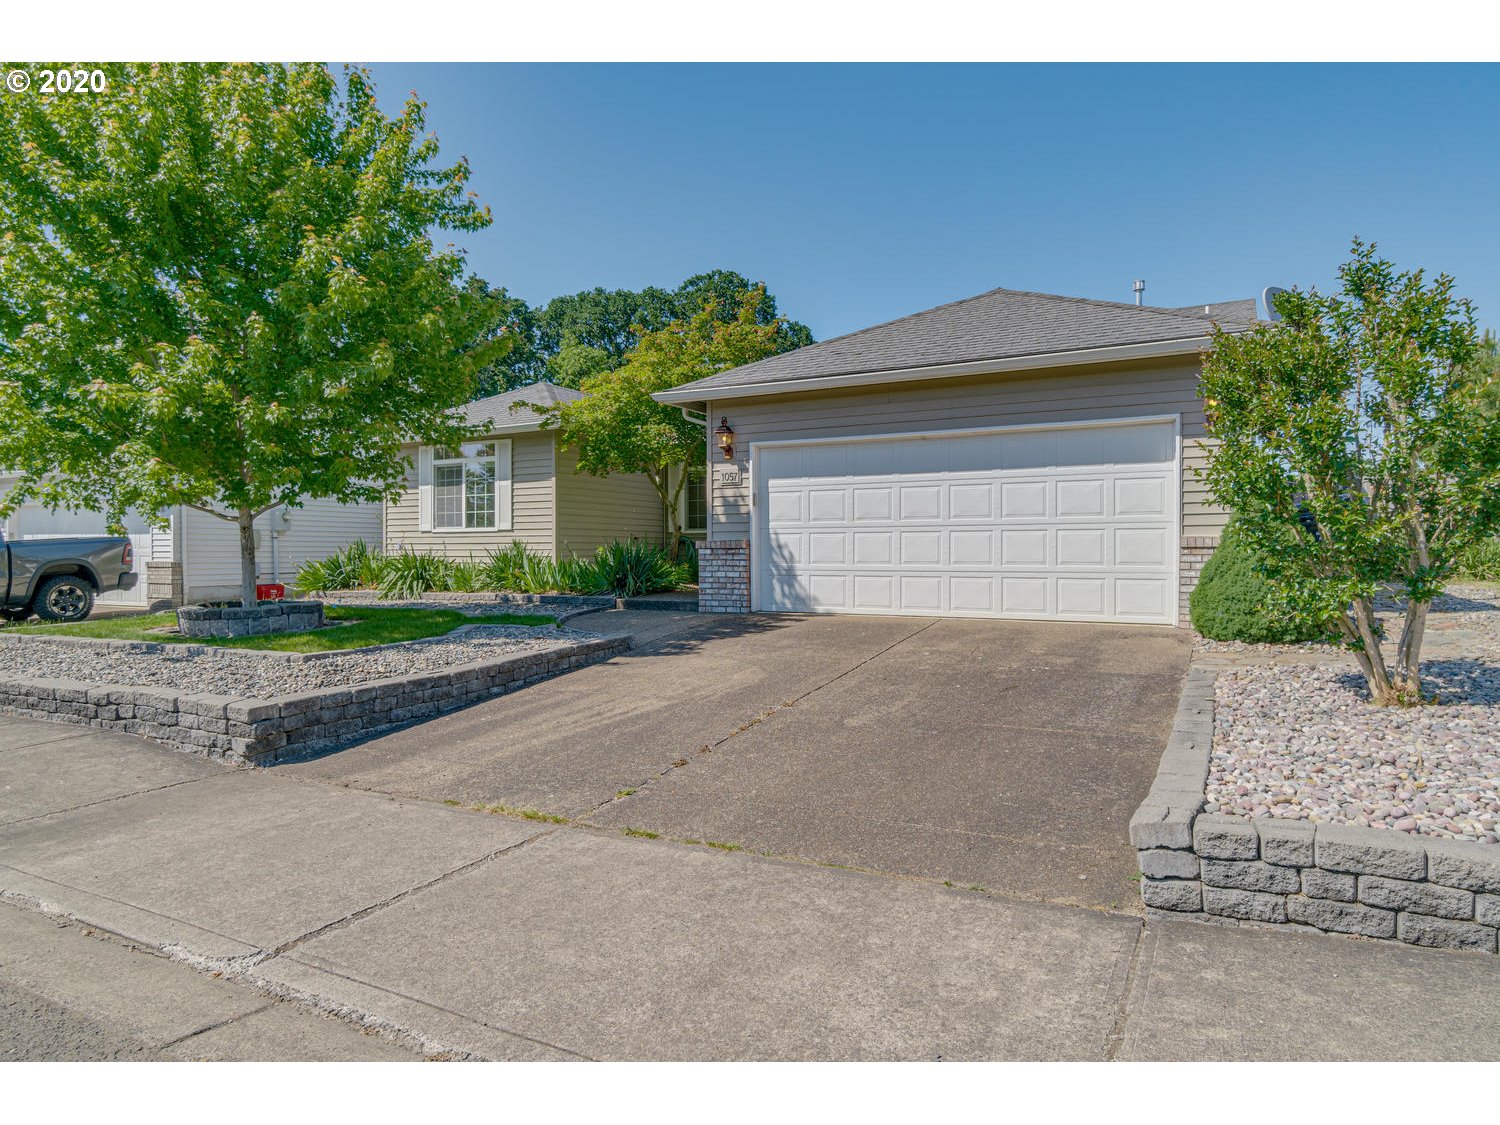 1057 MT VIEW LN (1 of 26)